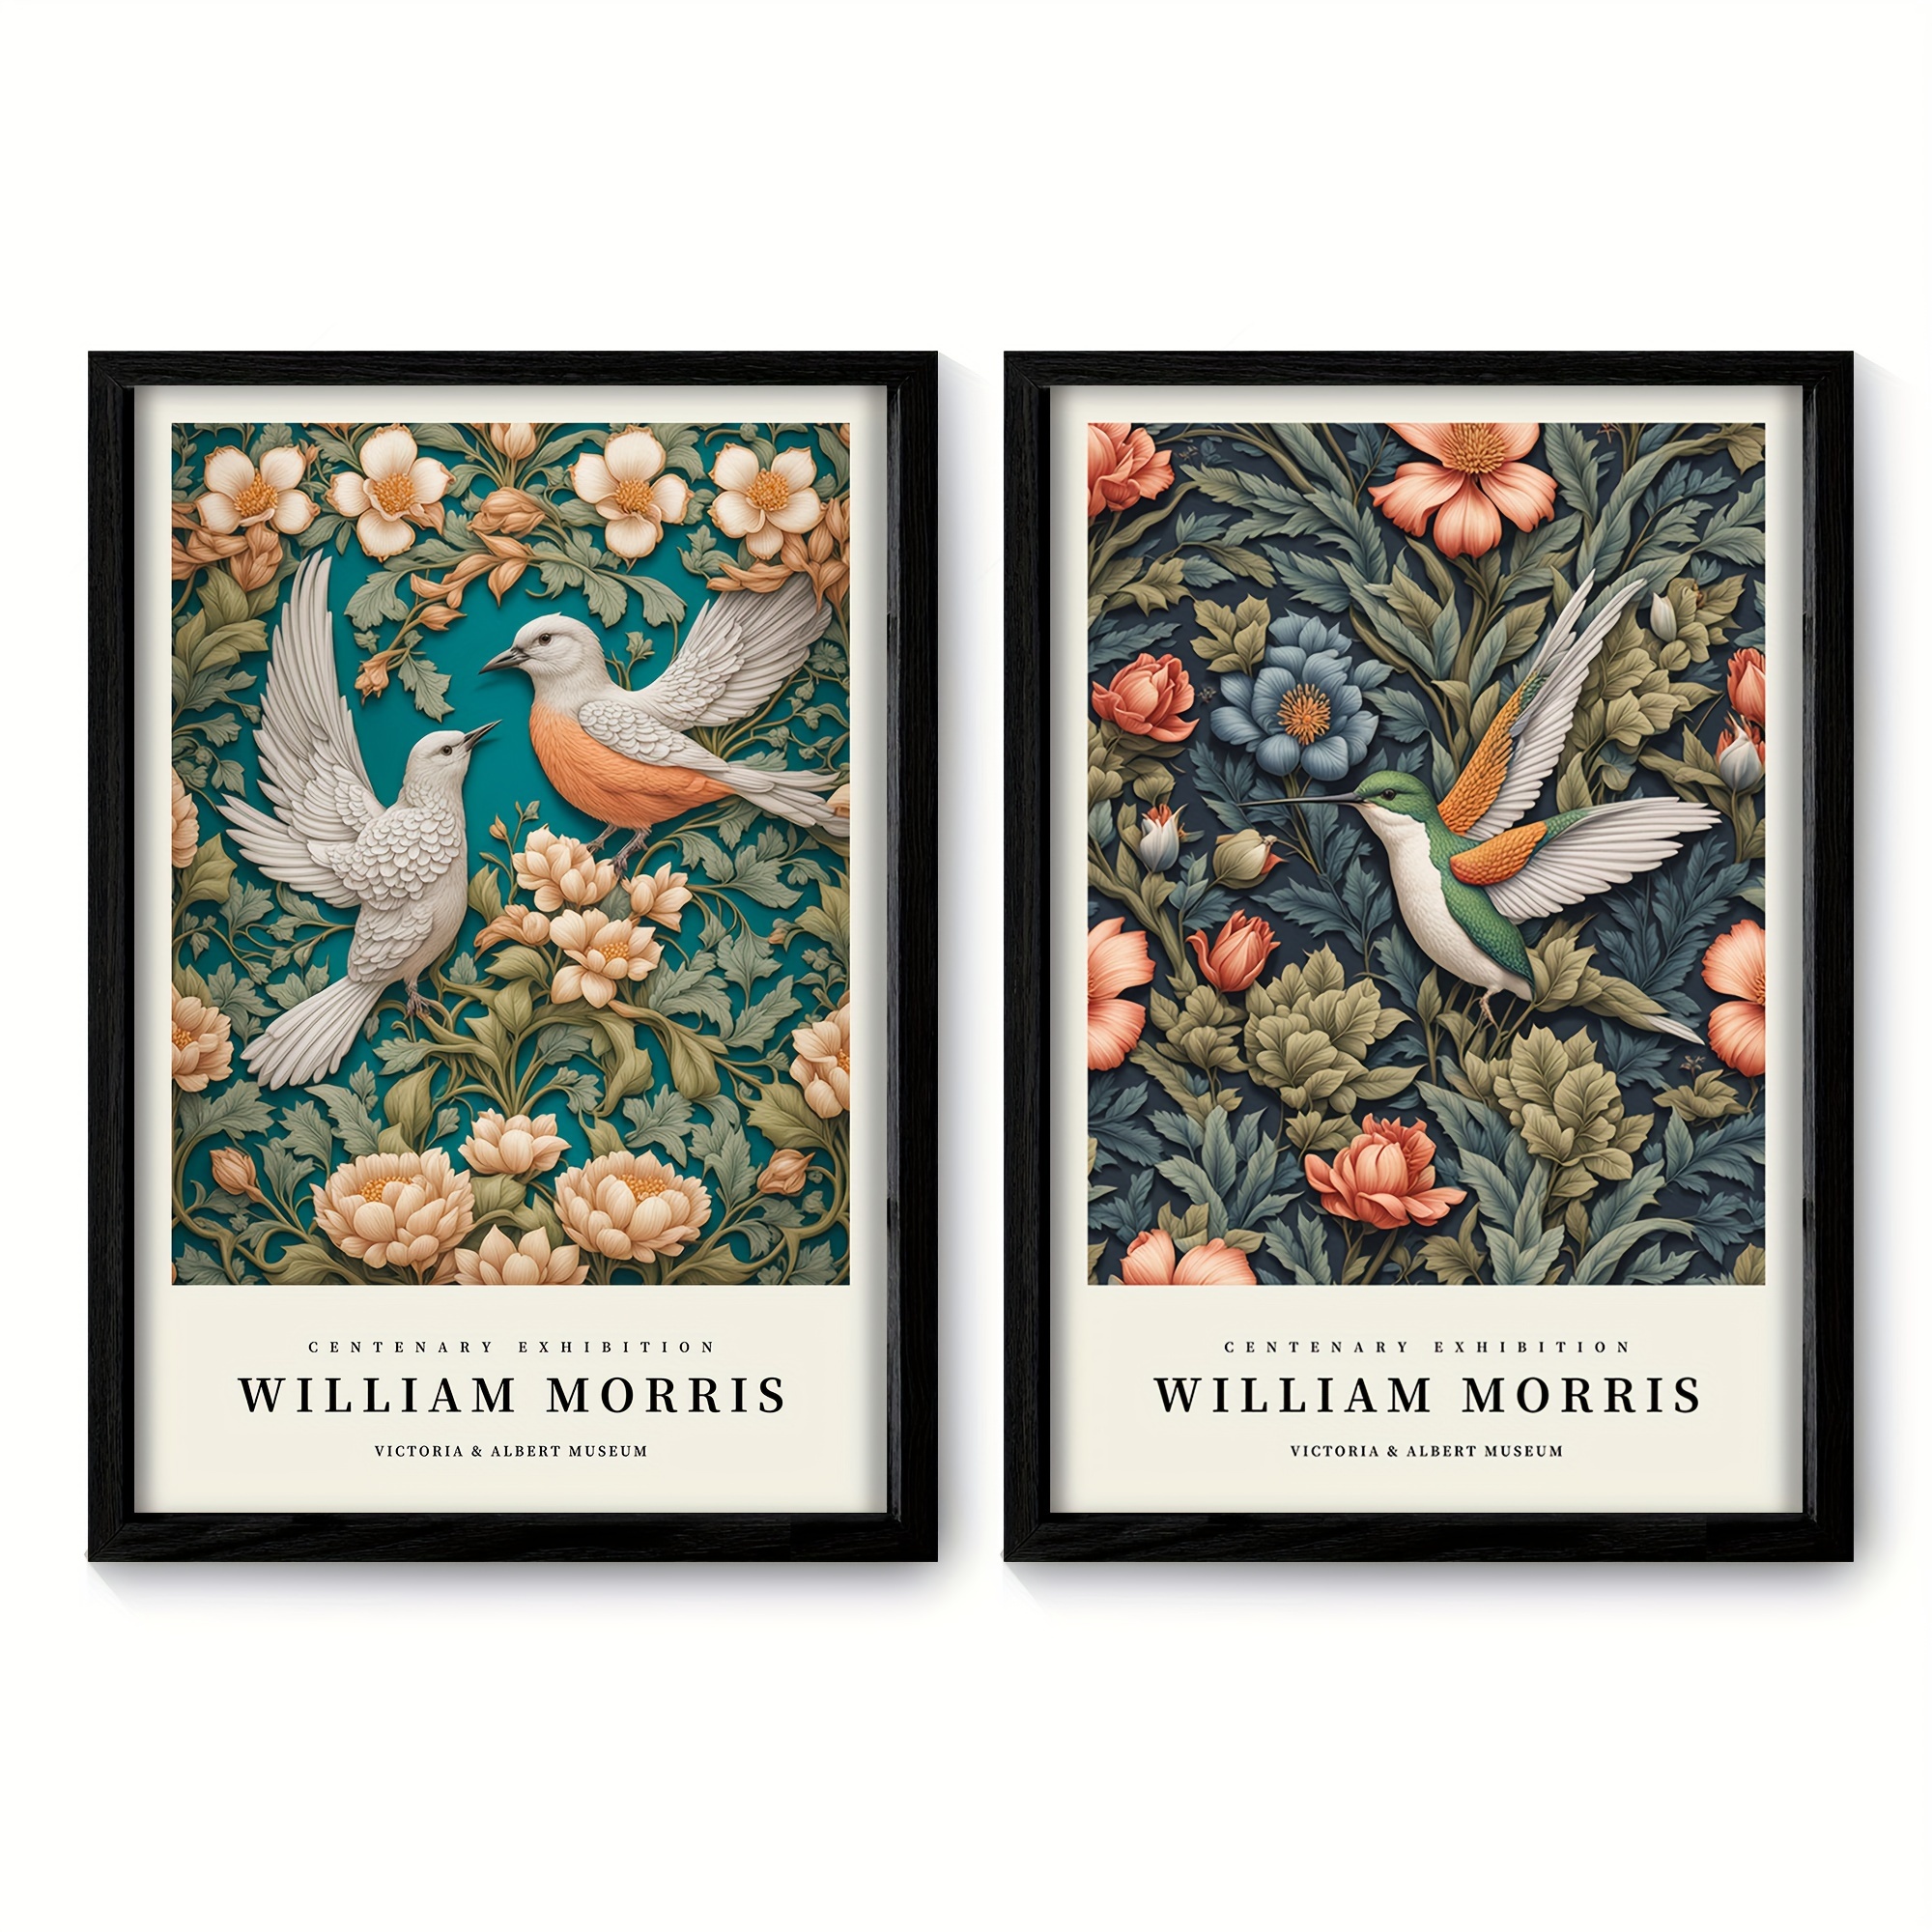 

2pcs, William Morris Framed Wall Art, Vintage Colorful Abstract Patterns Pictures, Inspirational Nature Floral Flowers Canvas Art For Living Room Bedroom Office Home Decor, Wood Frame